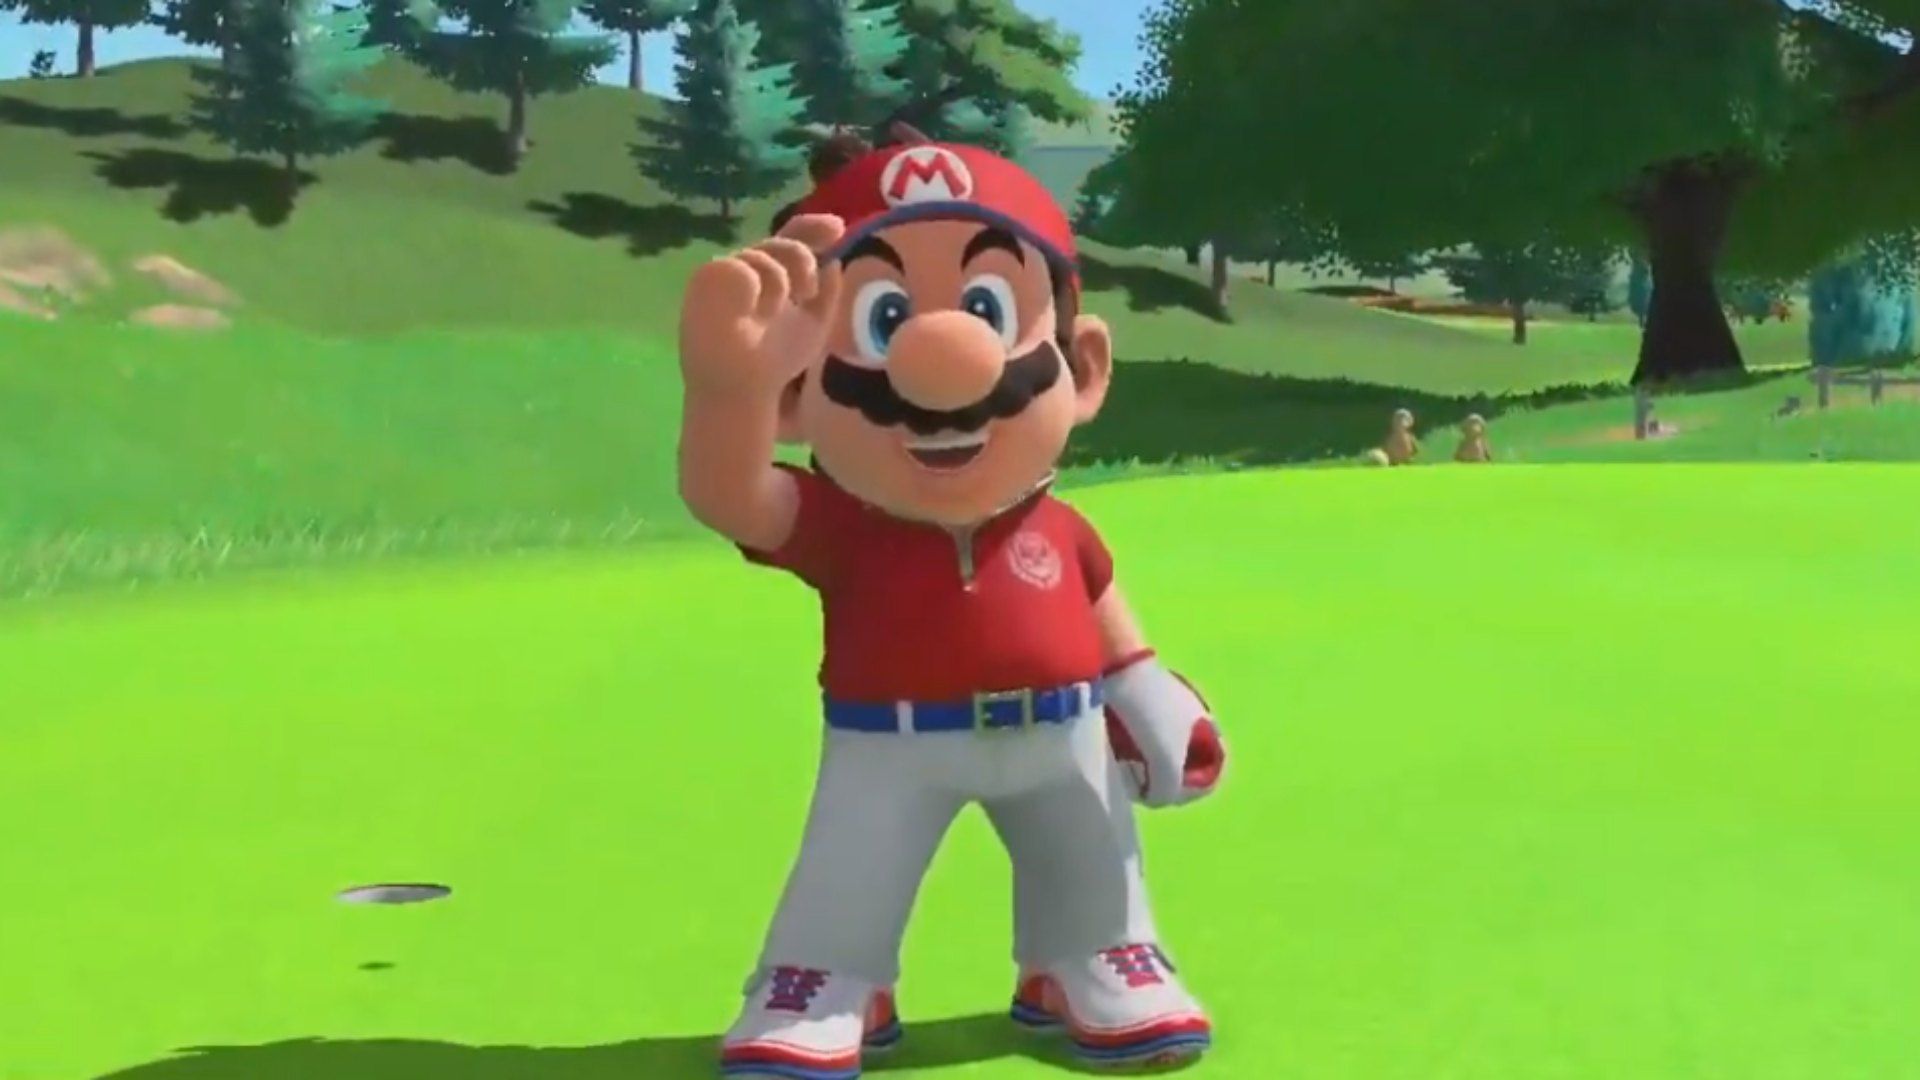 Mario Golf: Super Rush brings those Wii Sports thrills to Switch this year